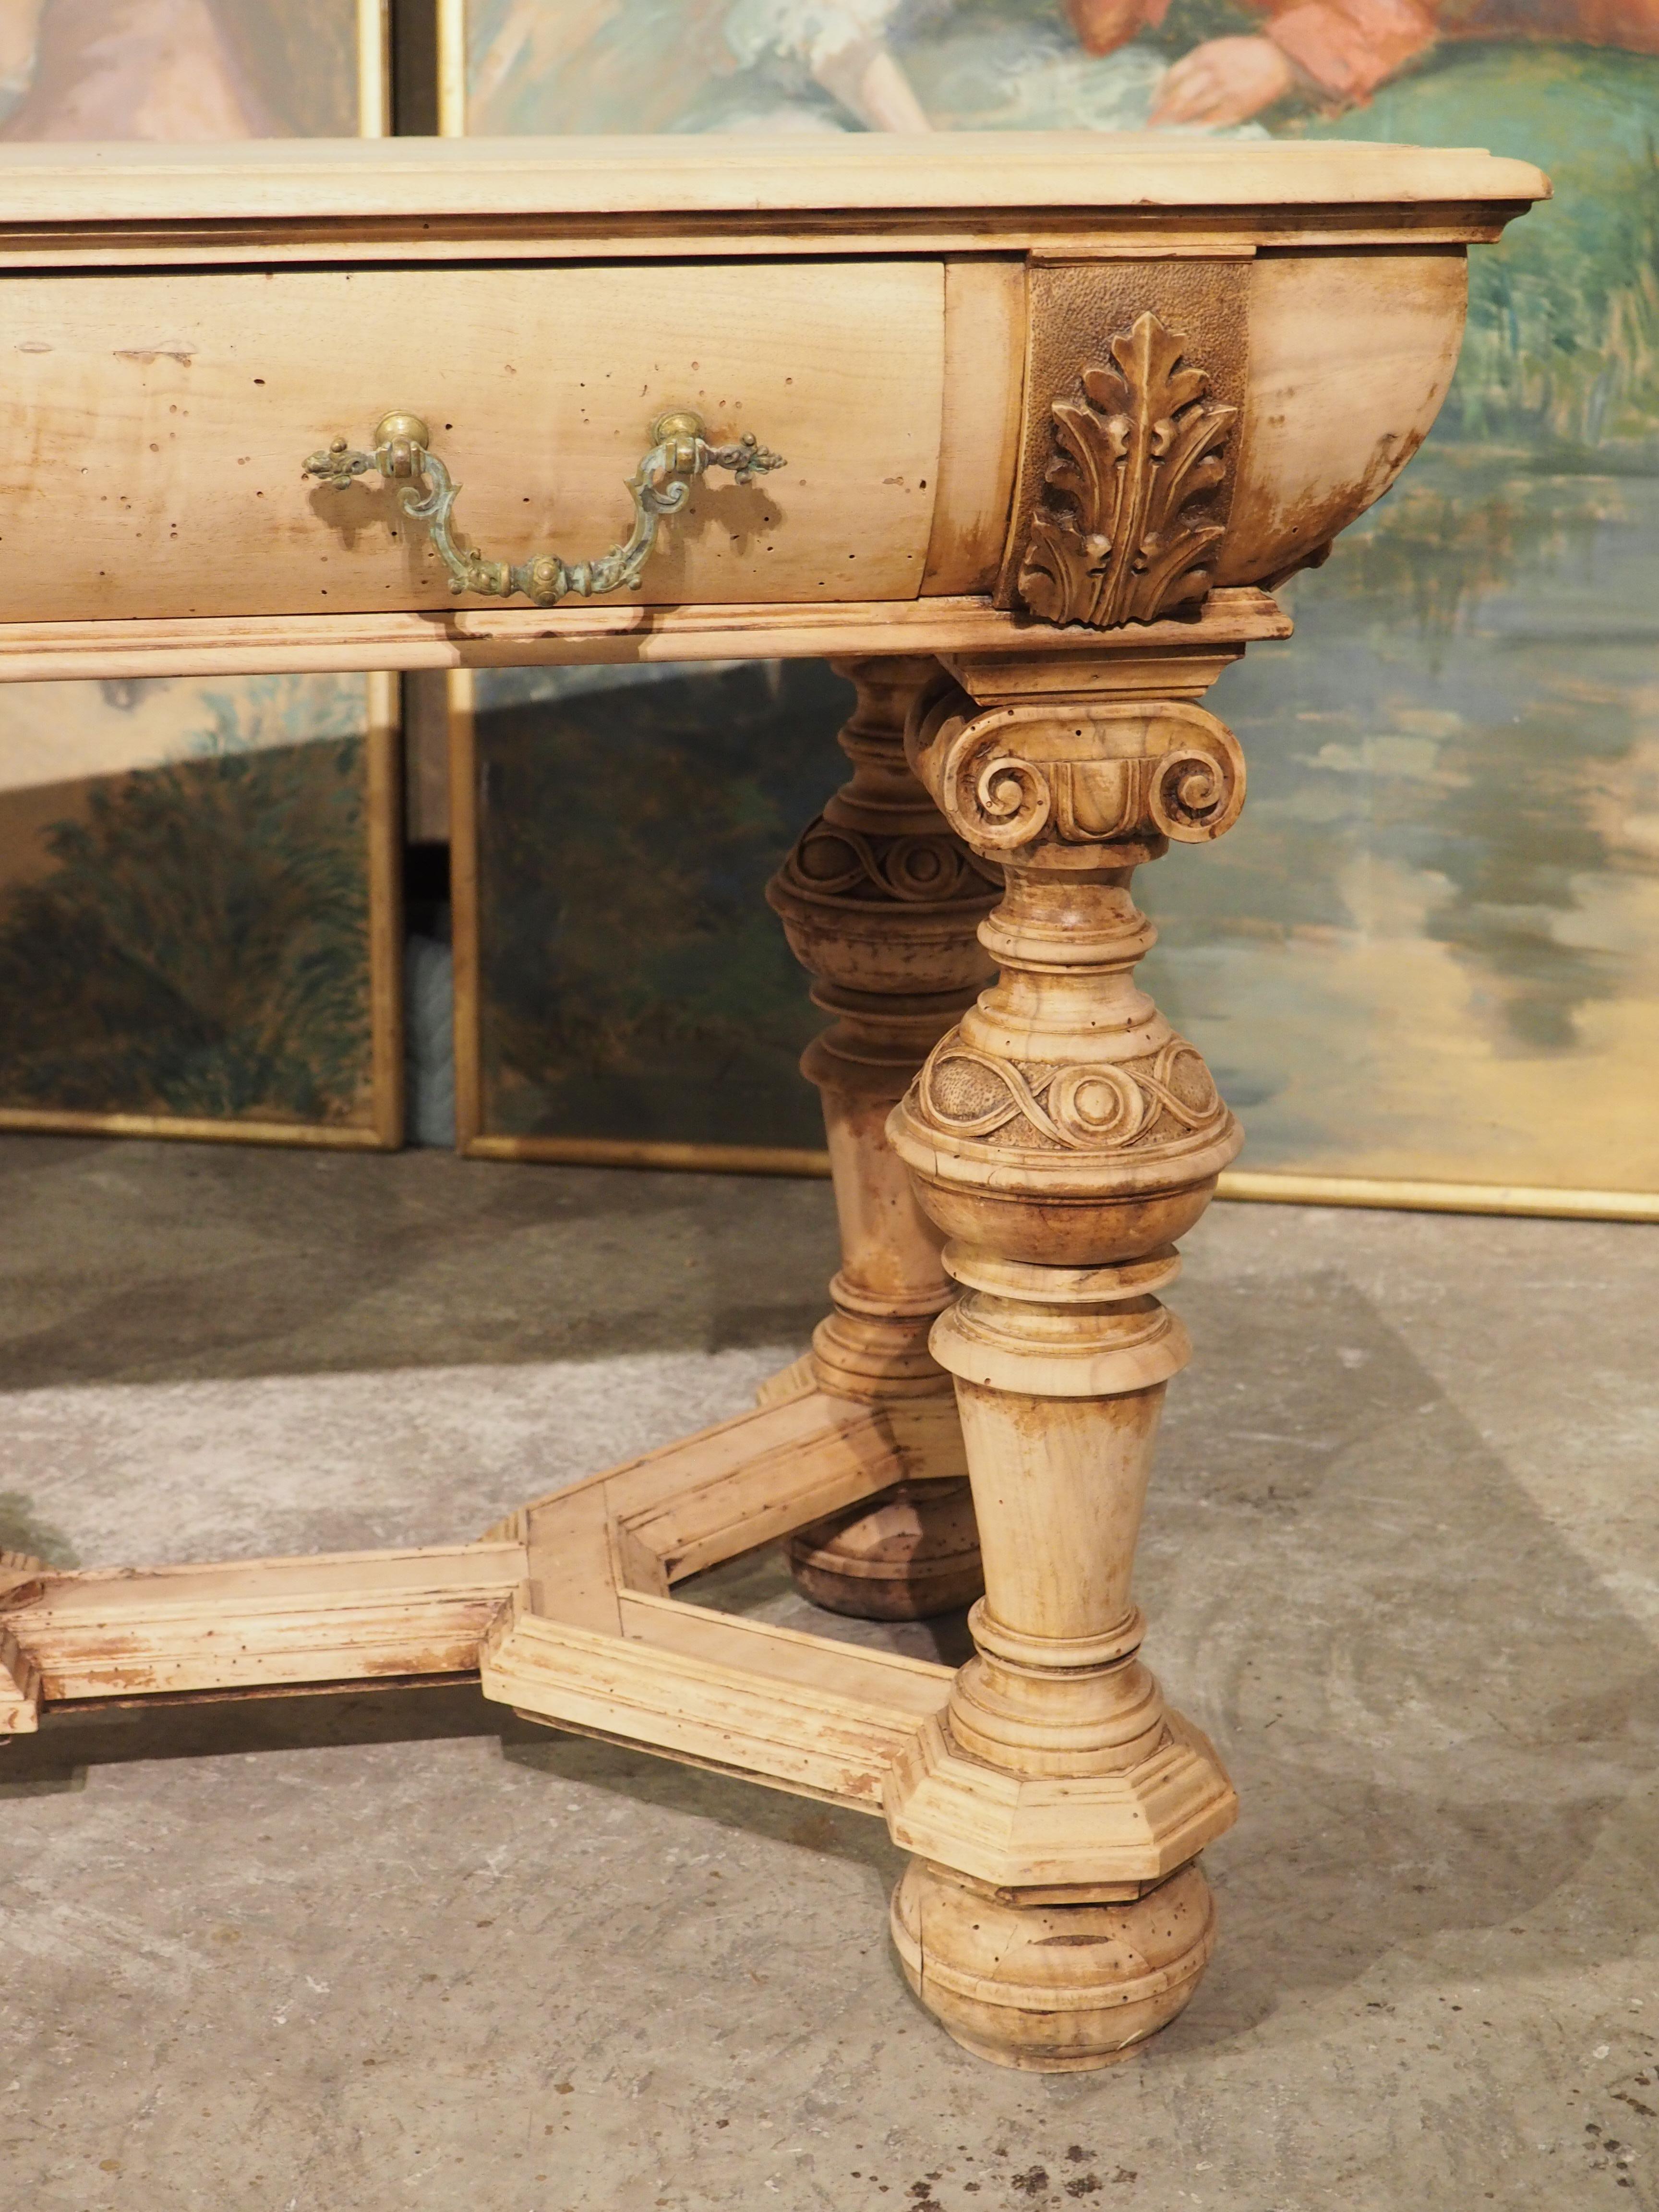 With slightly bulbous bodies, paired with decorative baluster legs and ball feet joined by angular stretchers, this pair of bleached Renaissance style tables from the 1800’s are definitively Dutch. The tables have been bleached at some point,